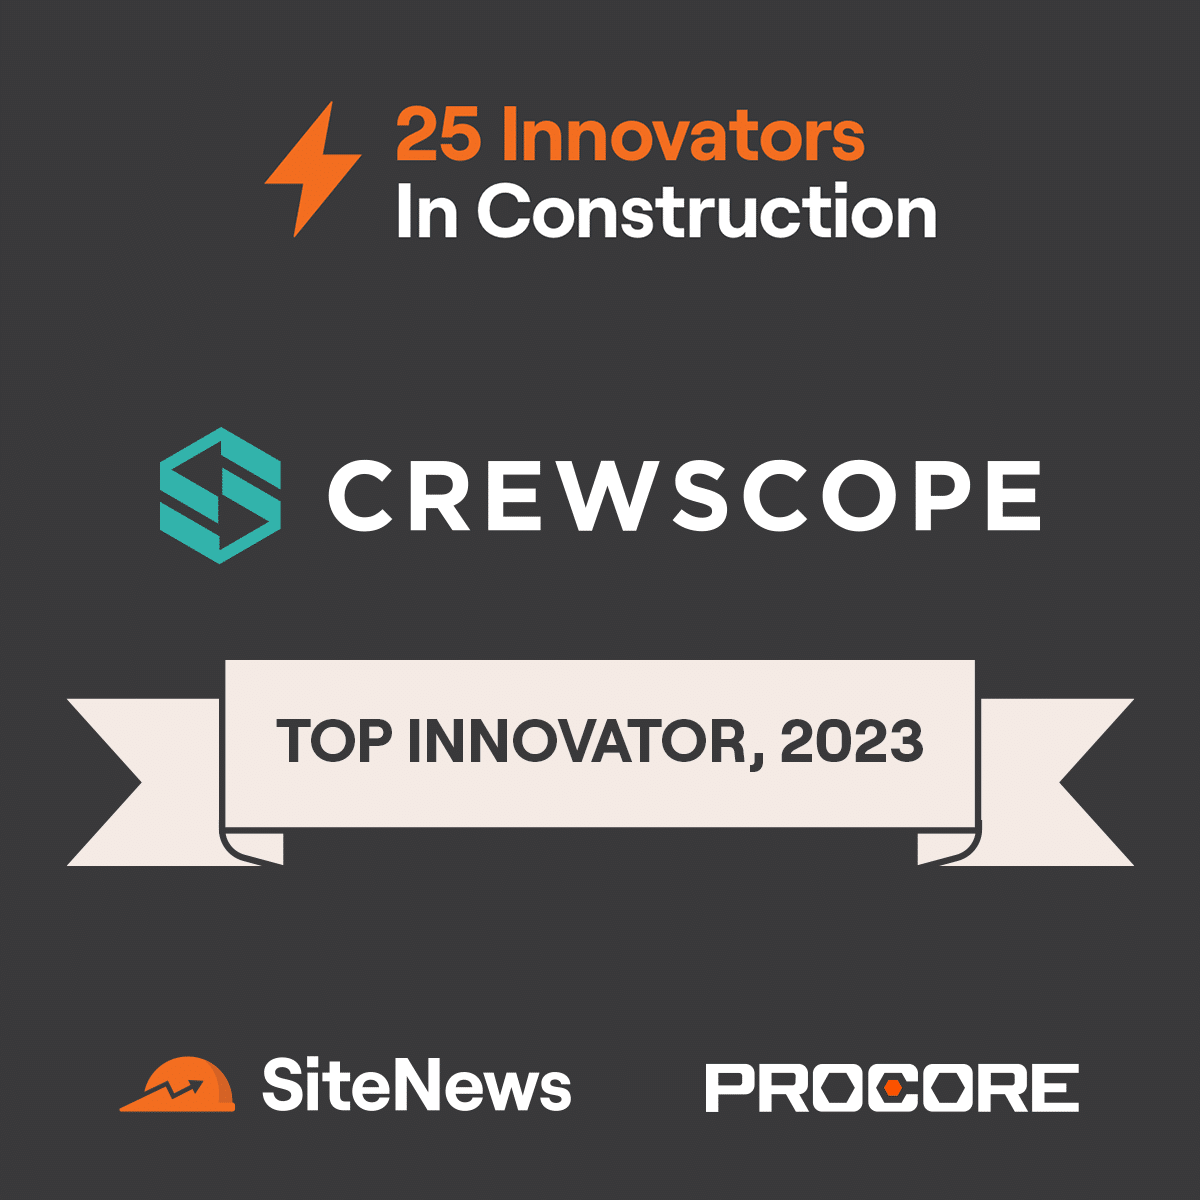 Canada's Top 25 Innovators in Construction